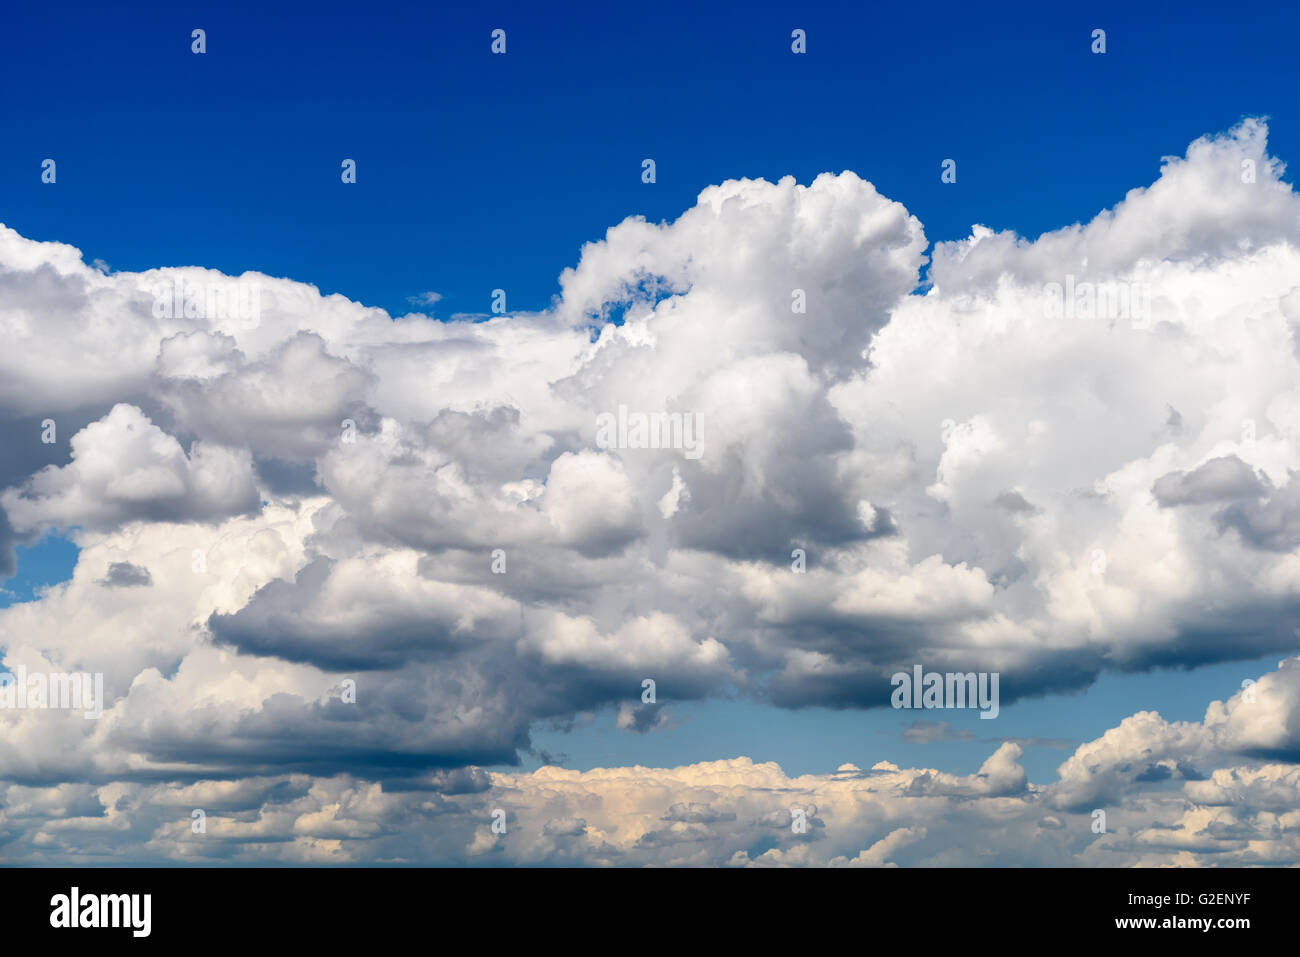 White Cumulus Clouds And Grey Storm Clouds Gathering On Blue Sky Stock Photo